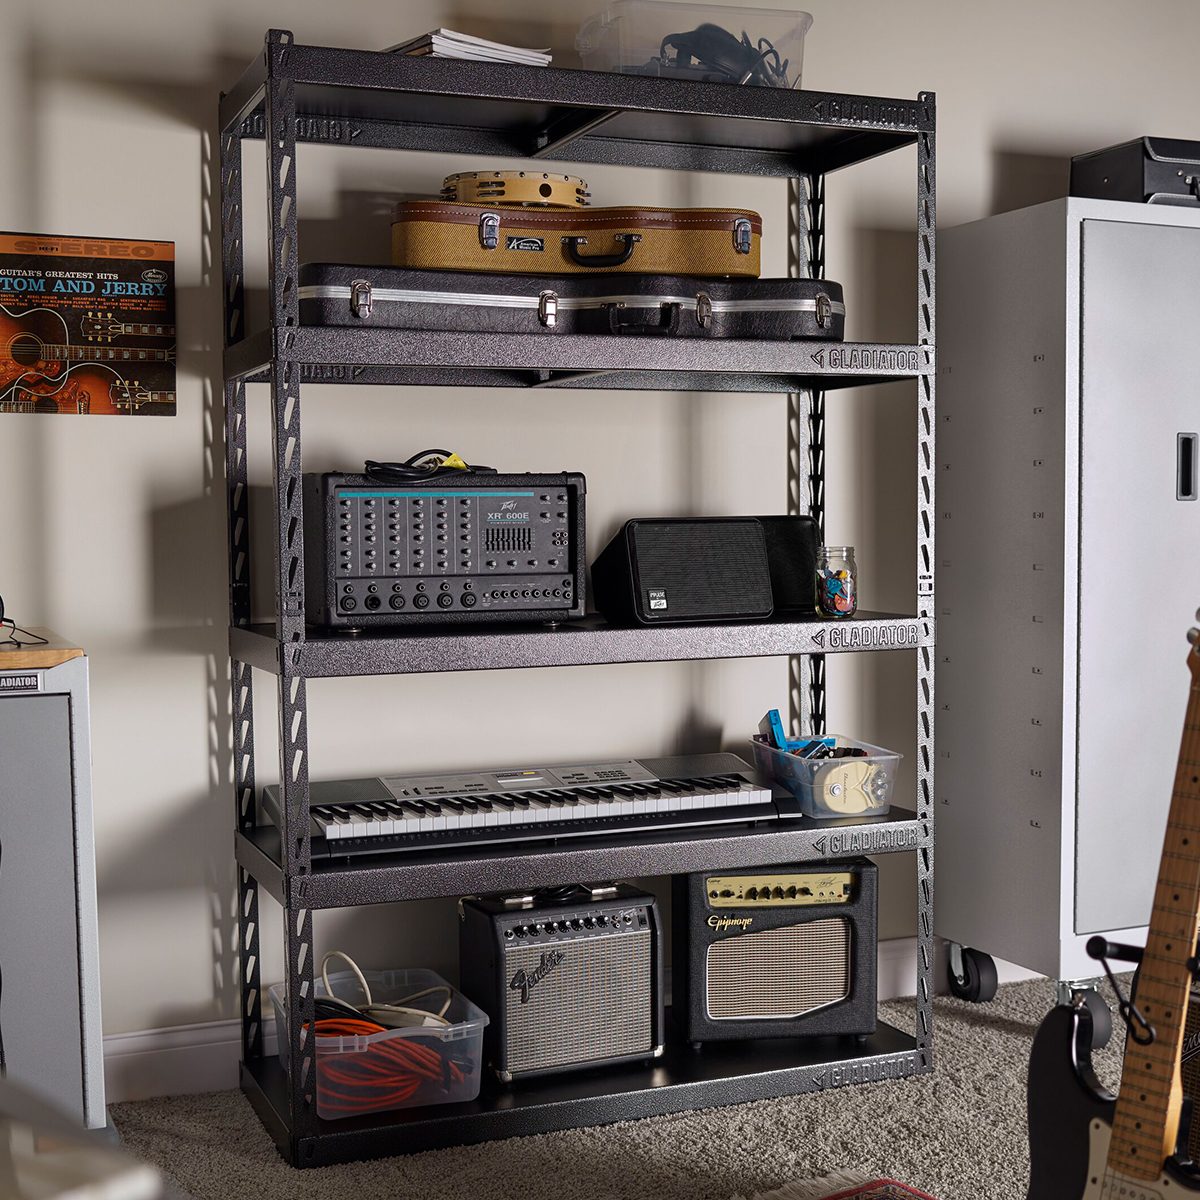 15 Garage Storage Shelves for Organizing Tools, Bins and More